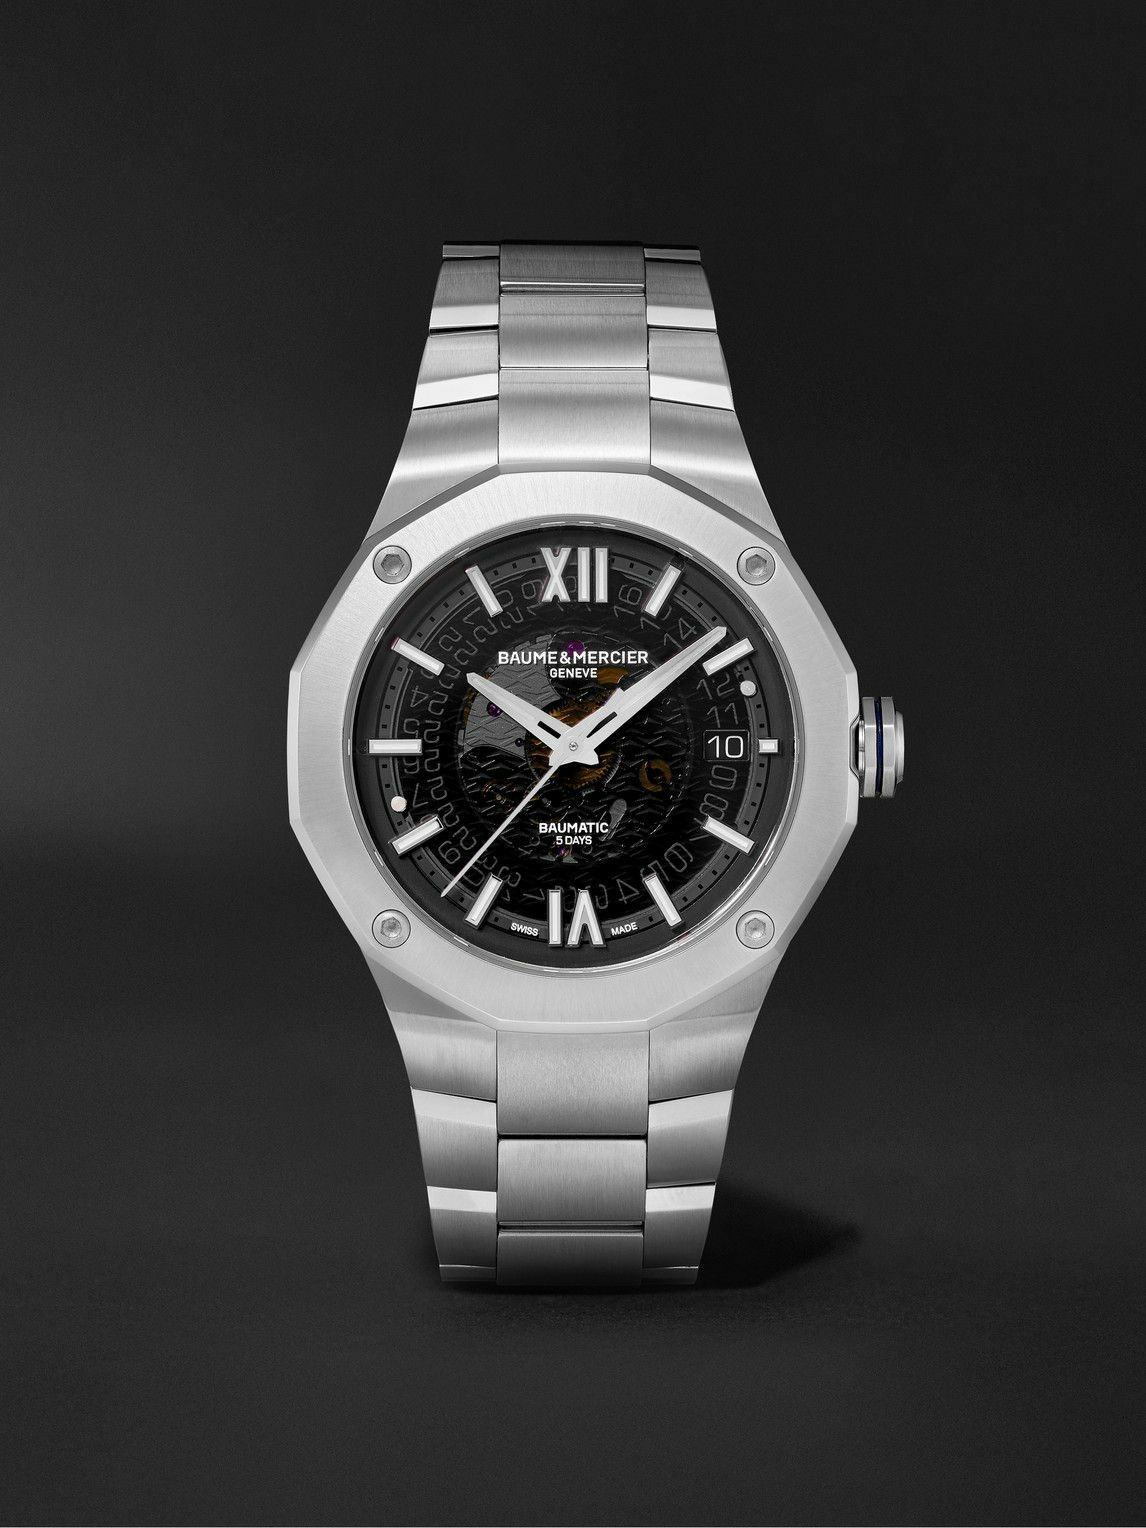 Photo: Baume & Mercier - Riviera Automatic 42mm Stainless Steel Watch, Ref. No. M0A10702